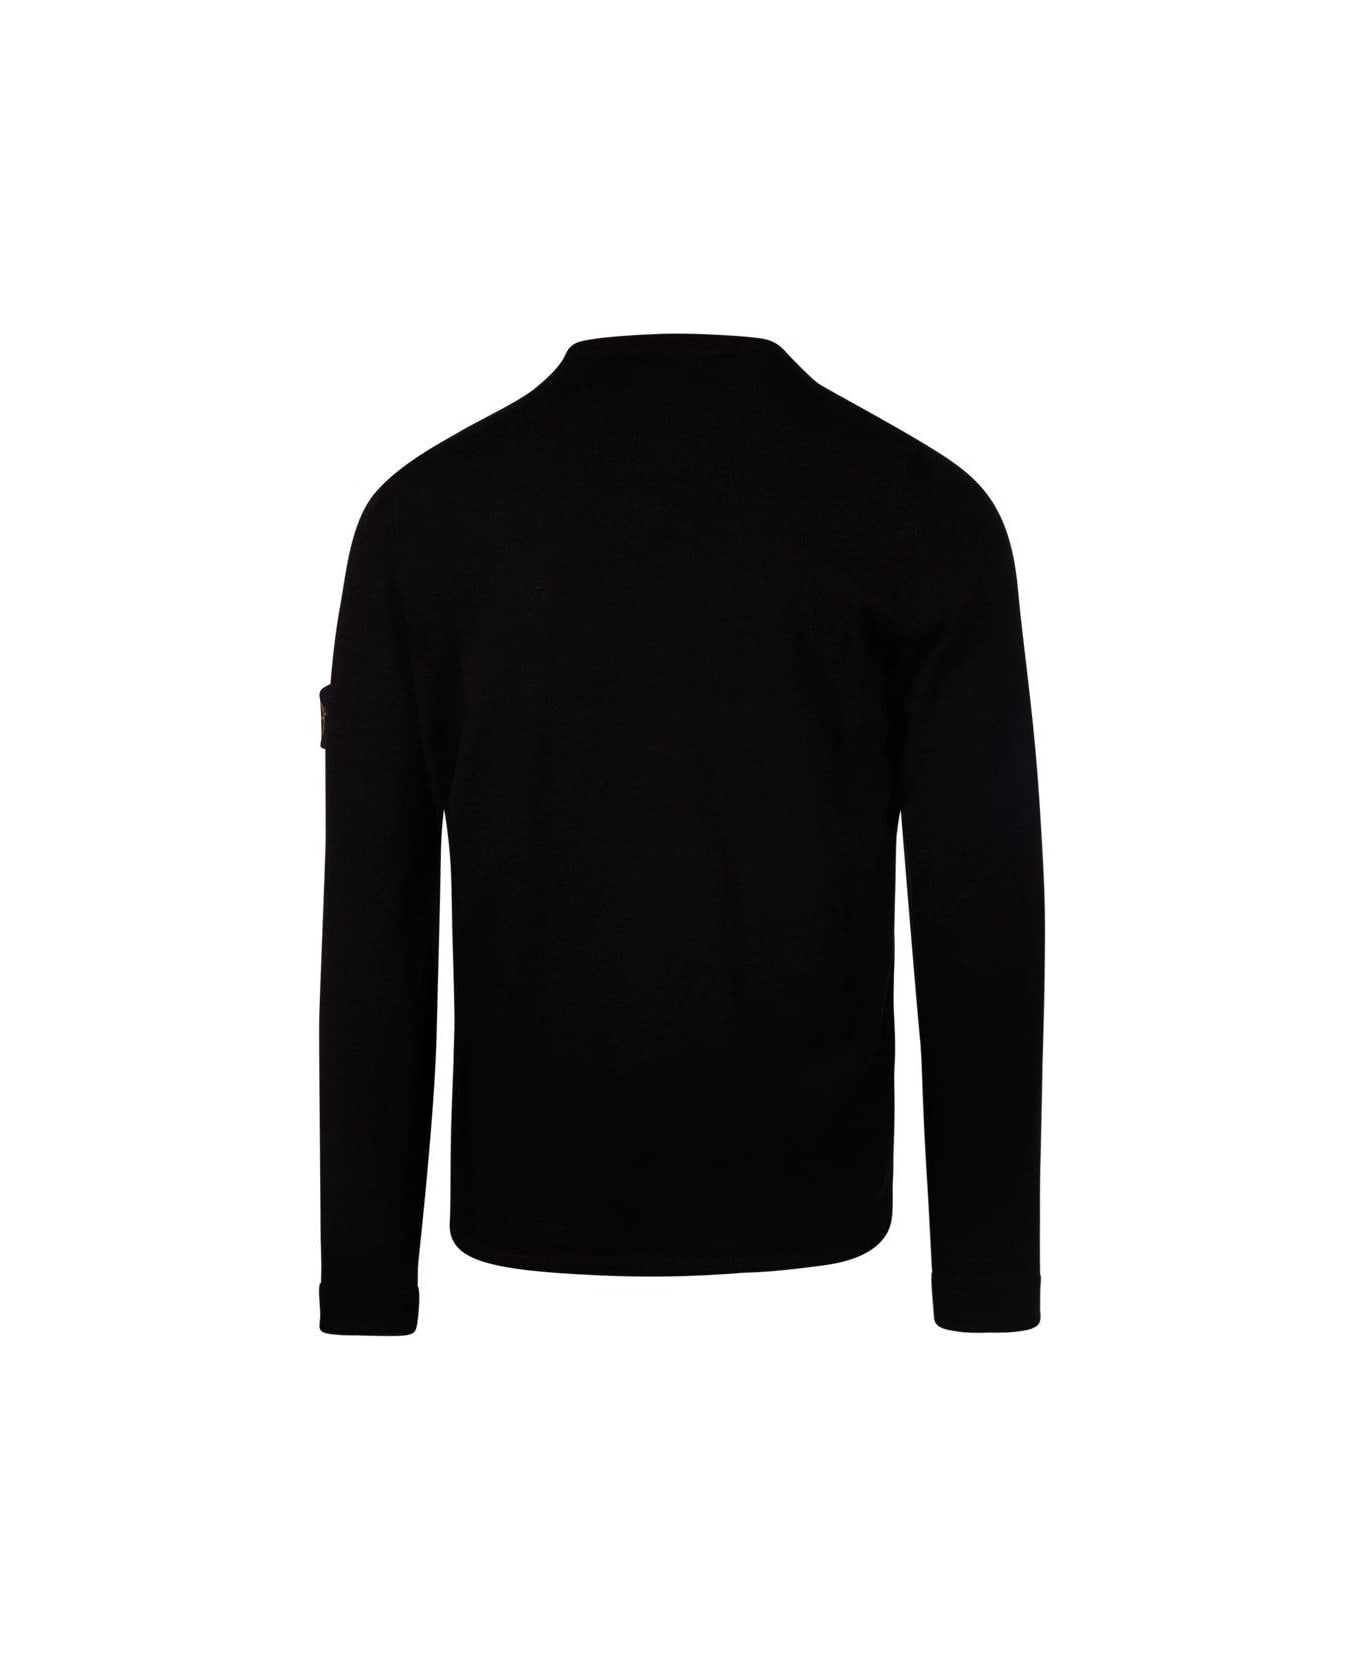 Stone Island Compass Patch Crewneck Knitted Jumper - Black